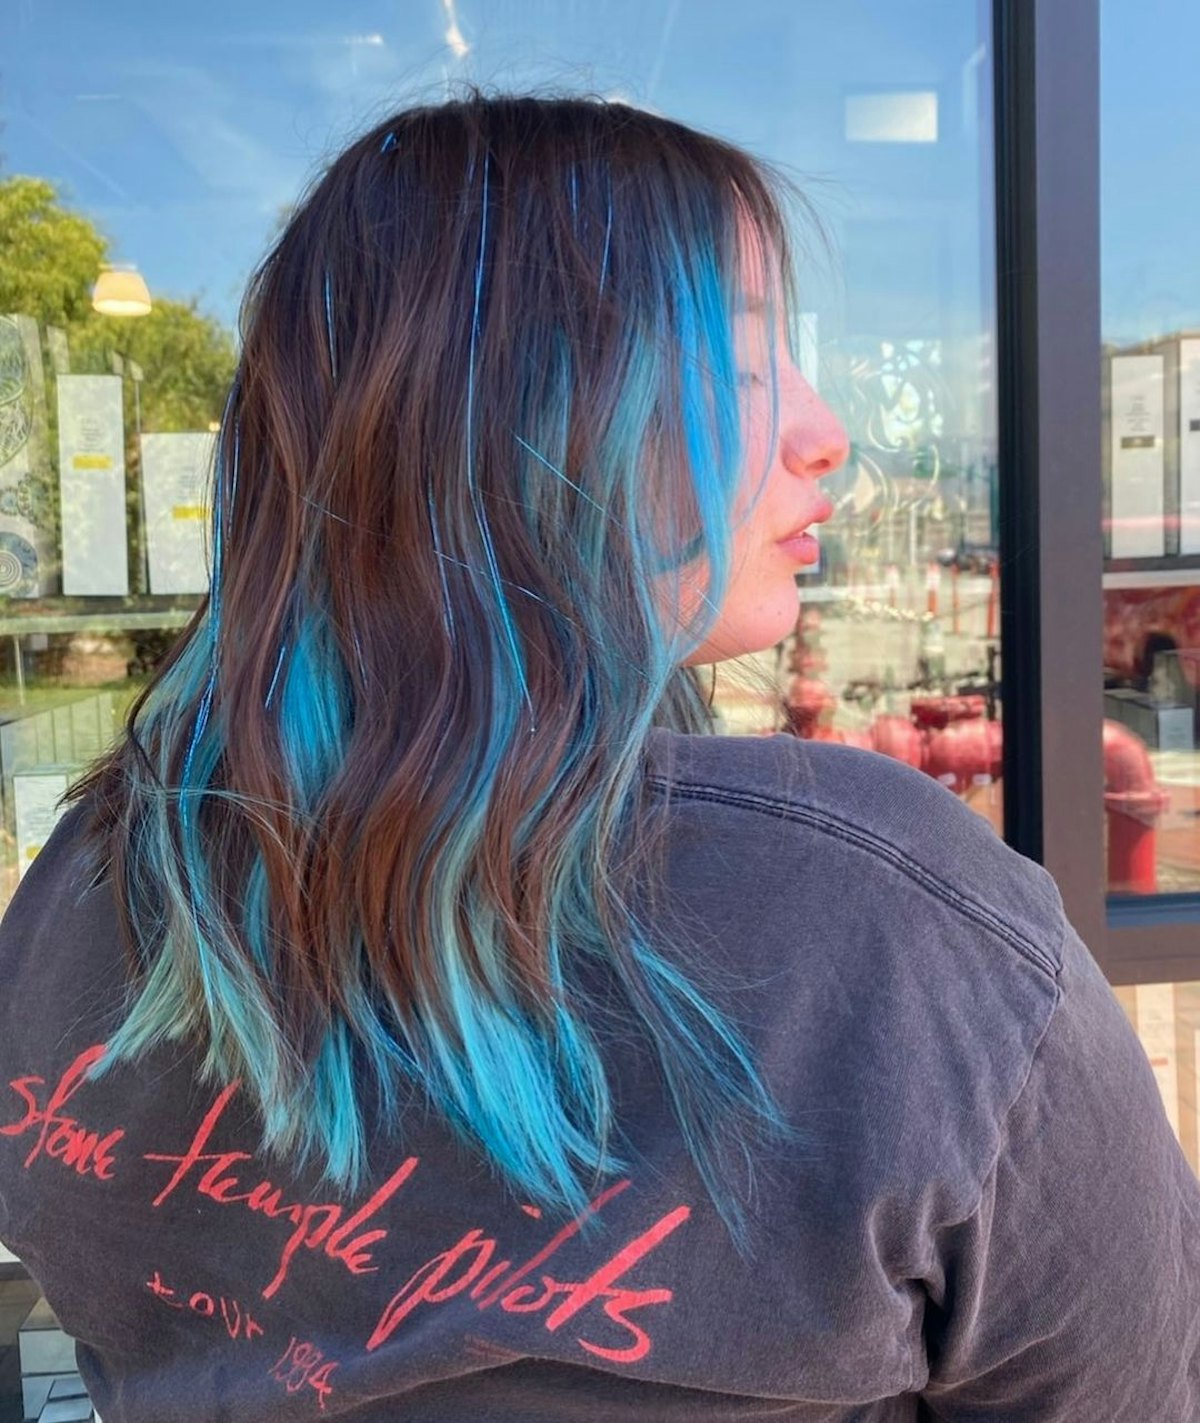 Consider mermaid hair if you're a Pisces.